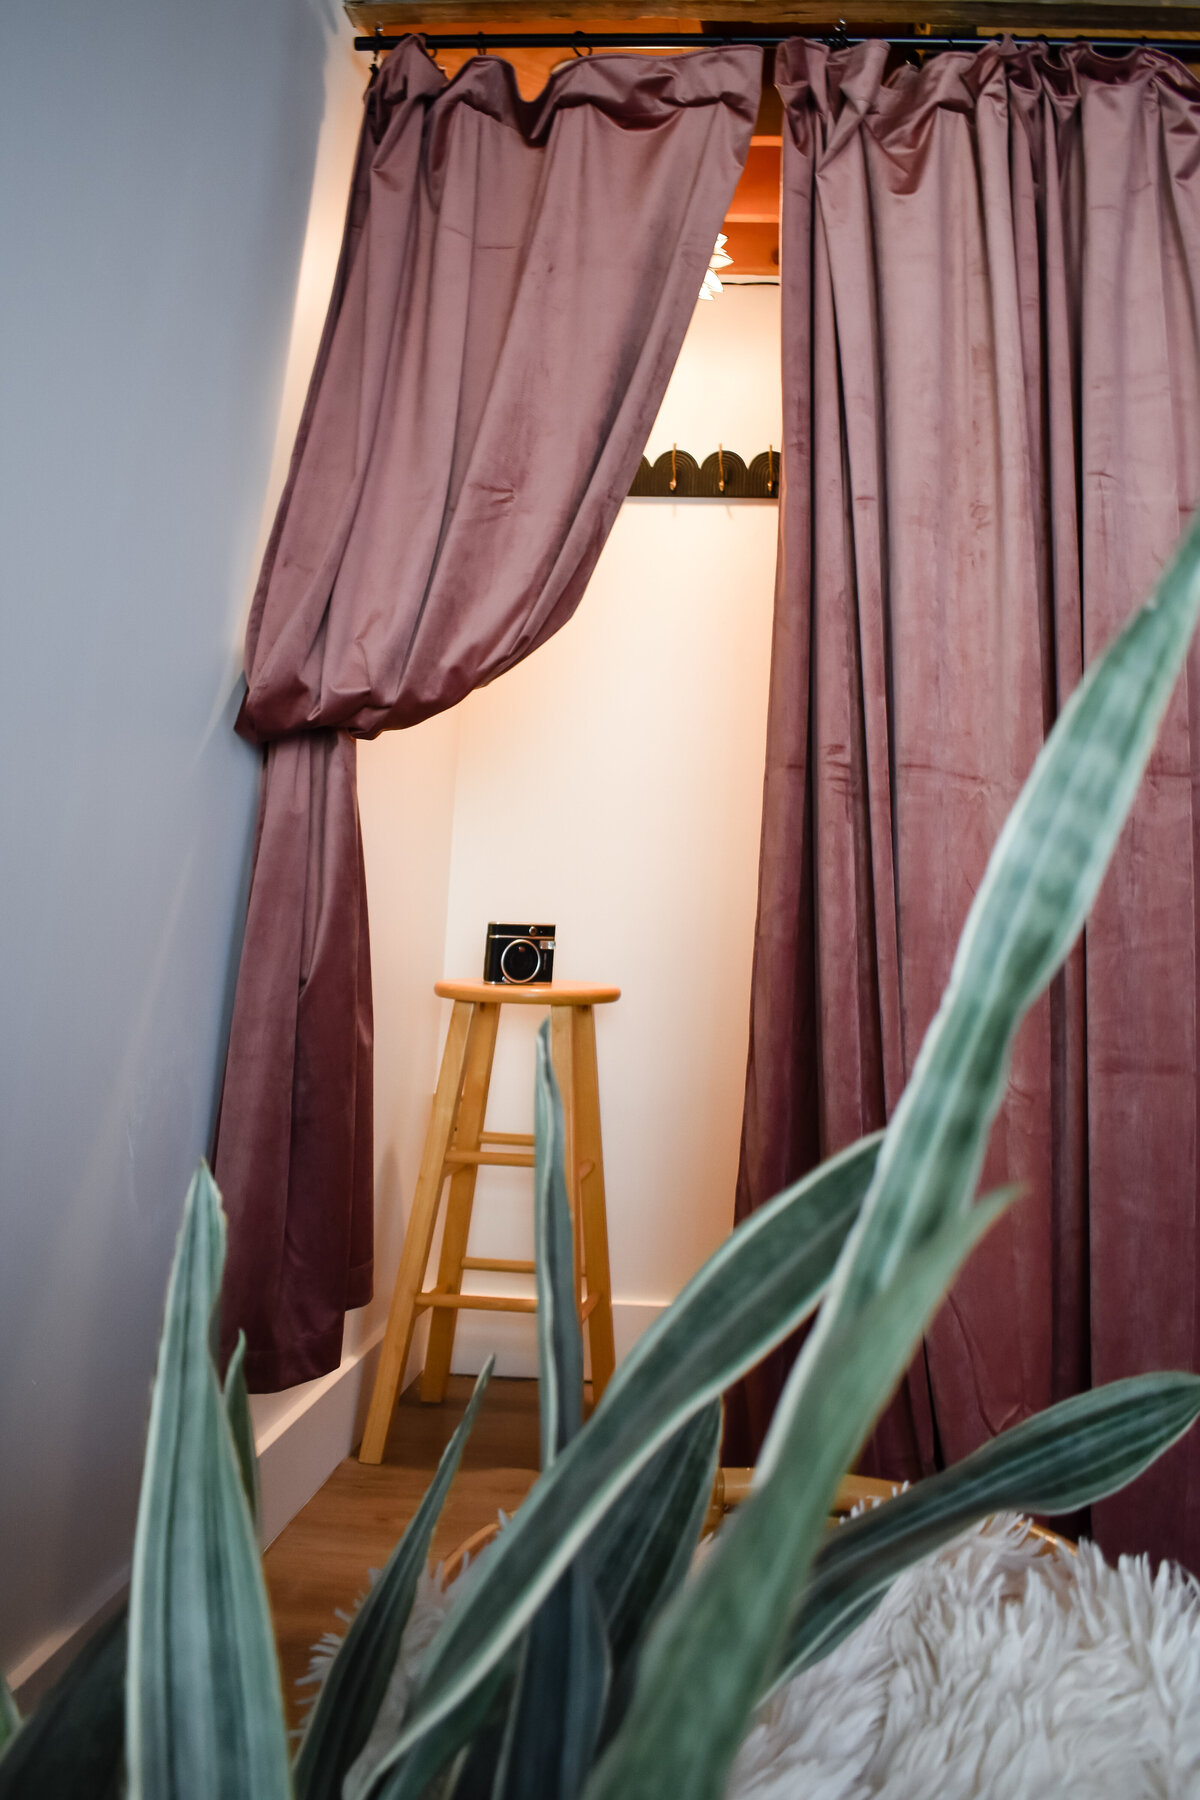 A blush curtain is pulled back to reveal a small dressing room